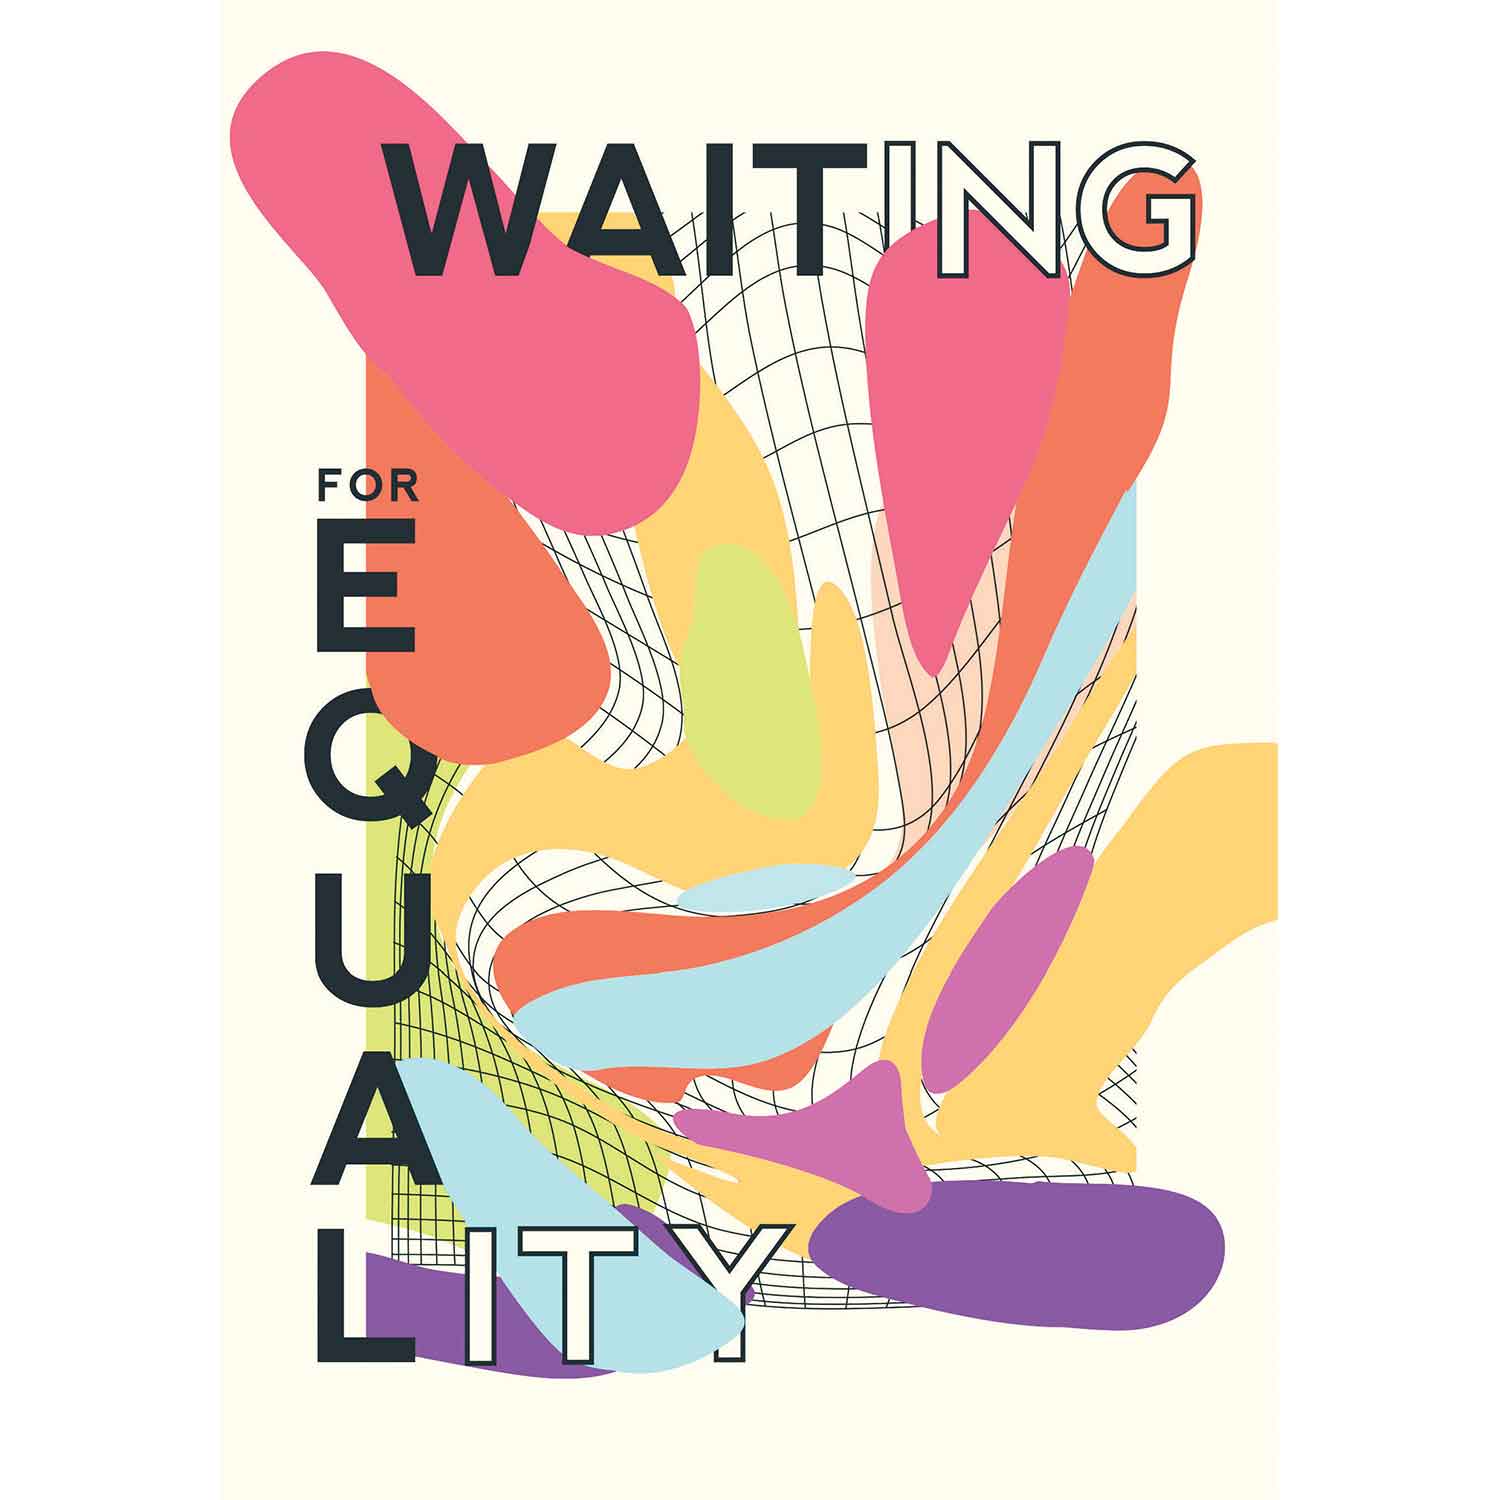 History of Gay and Lesbian Rights Features in Waiting for Equality Exhibition